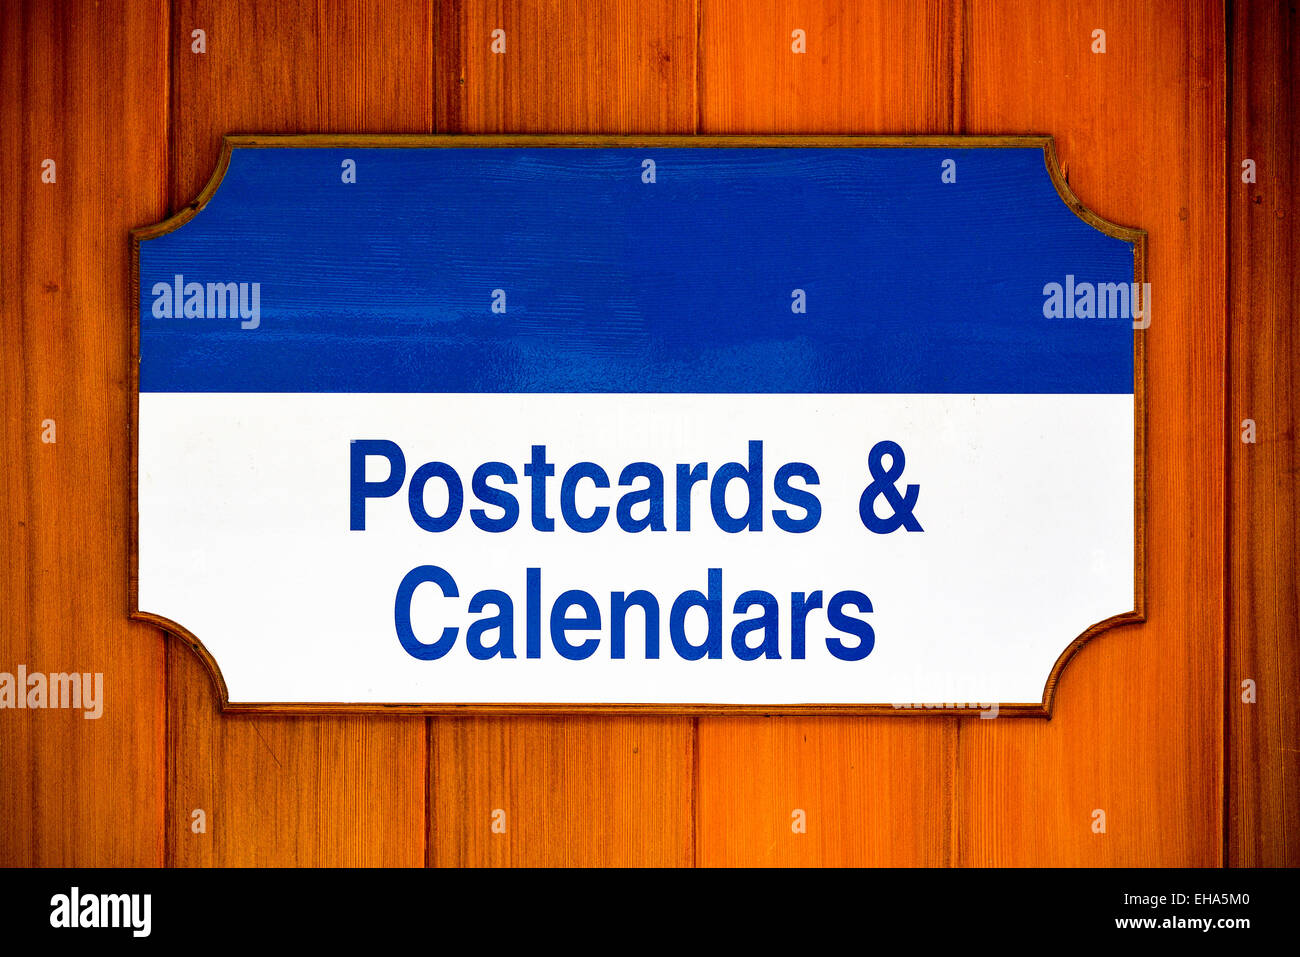 Postcards and calendars sign Stock Photo